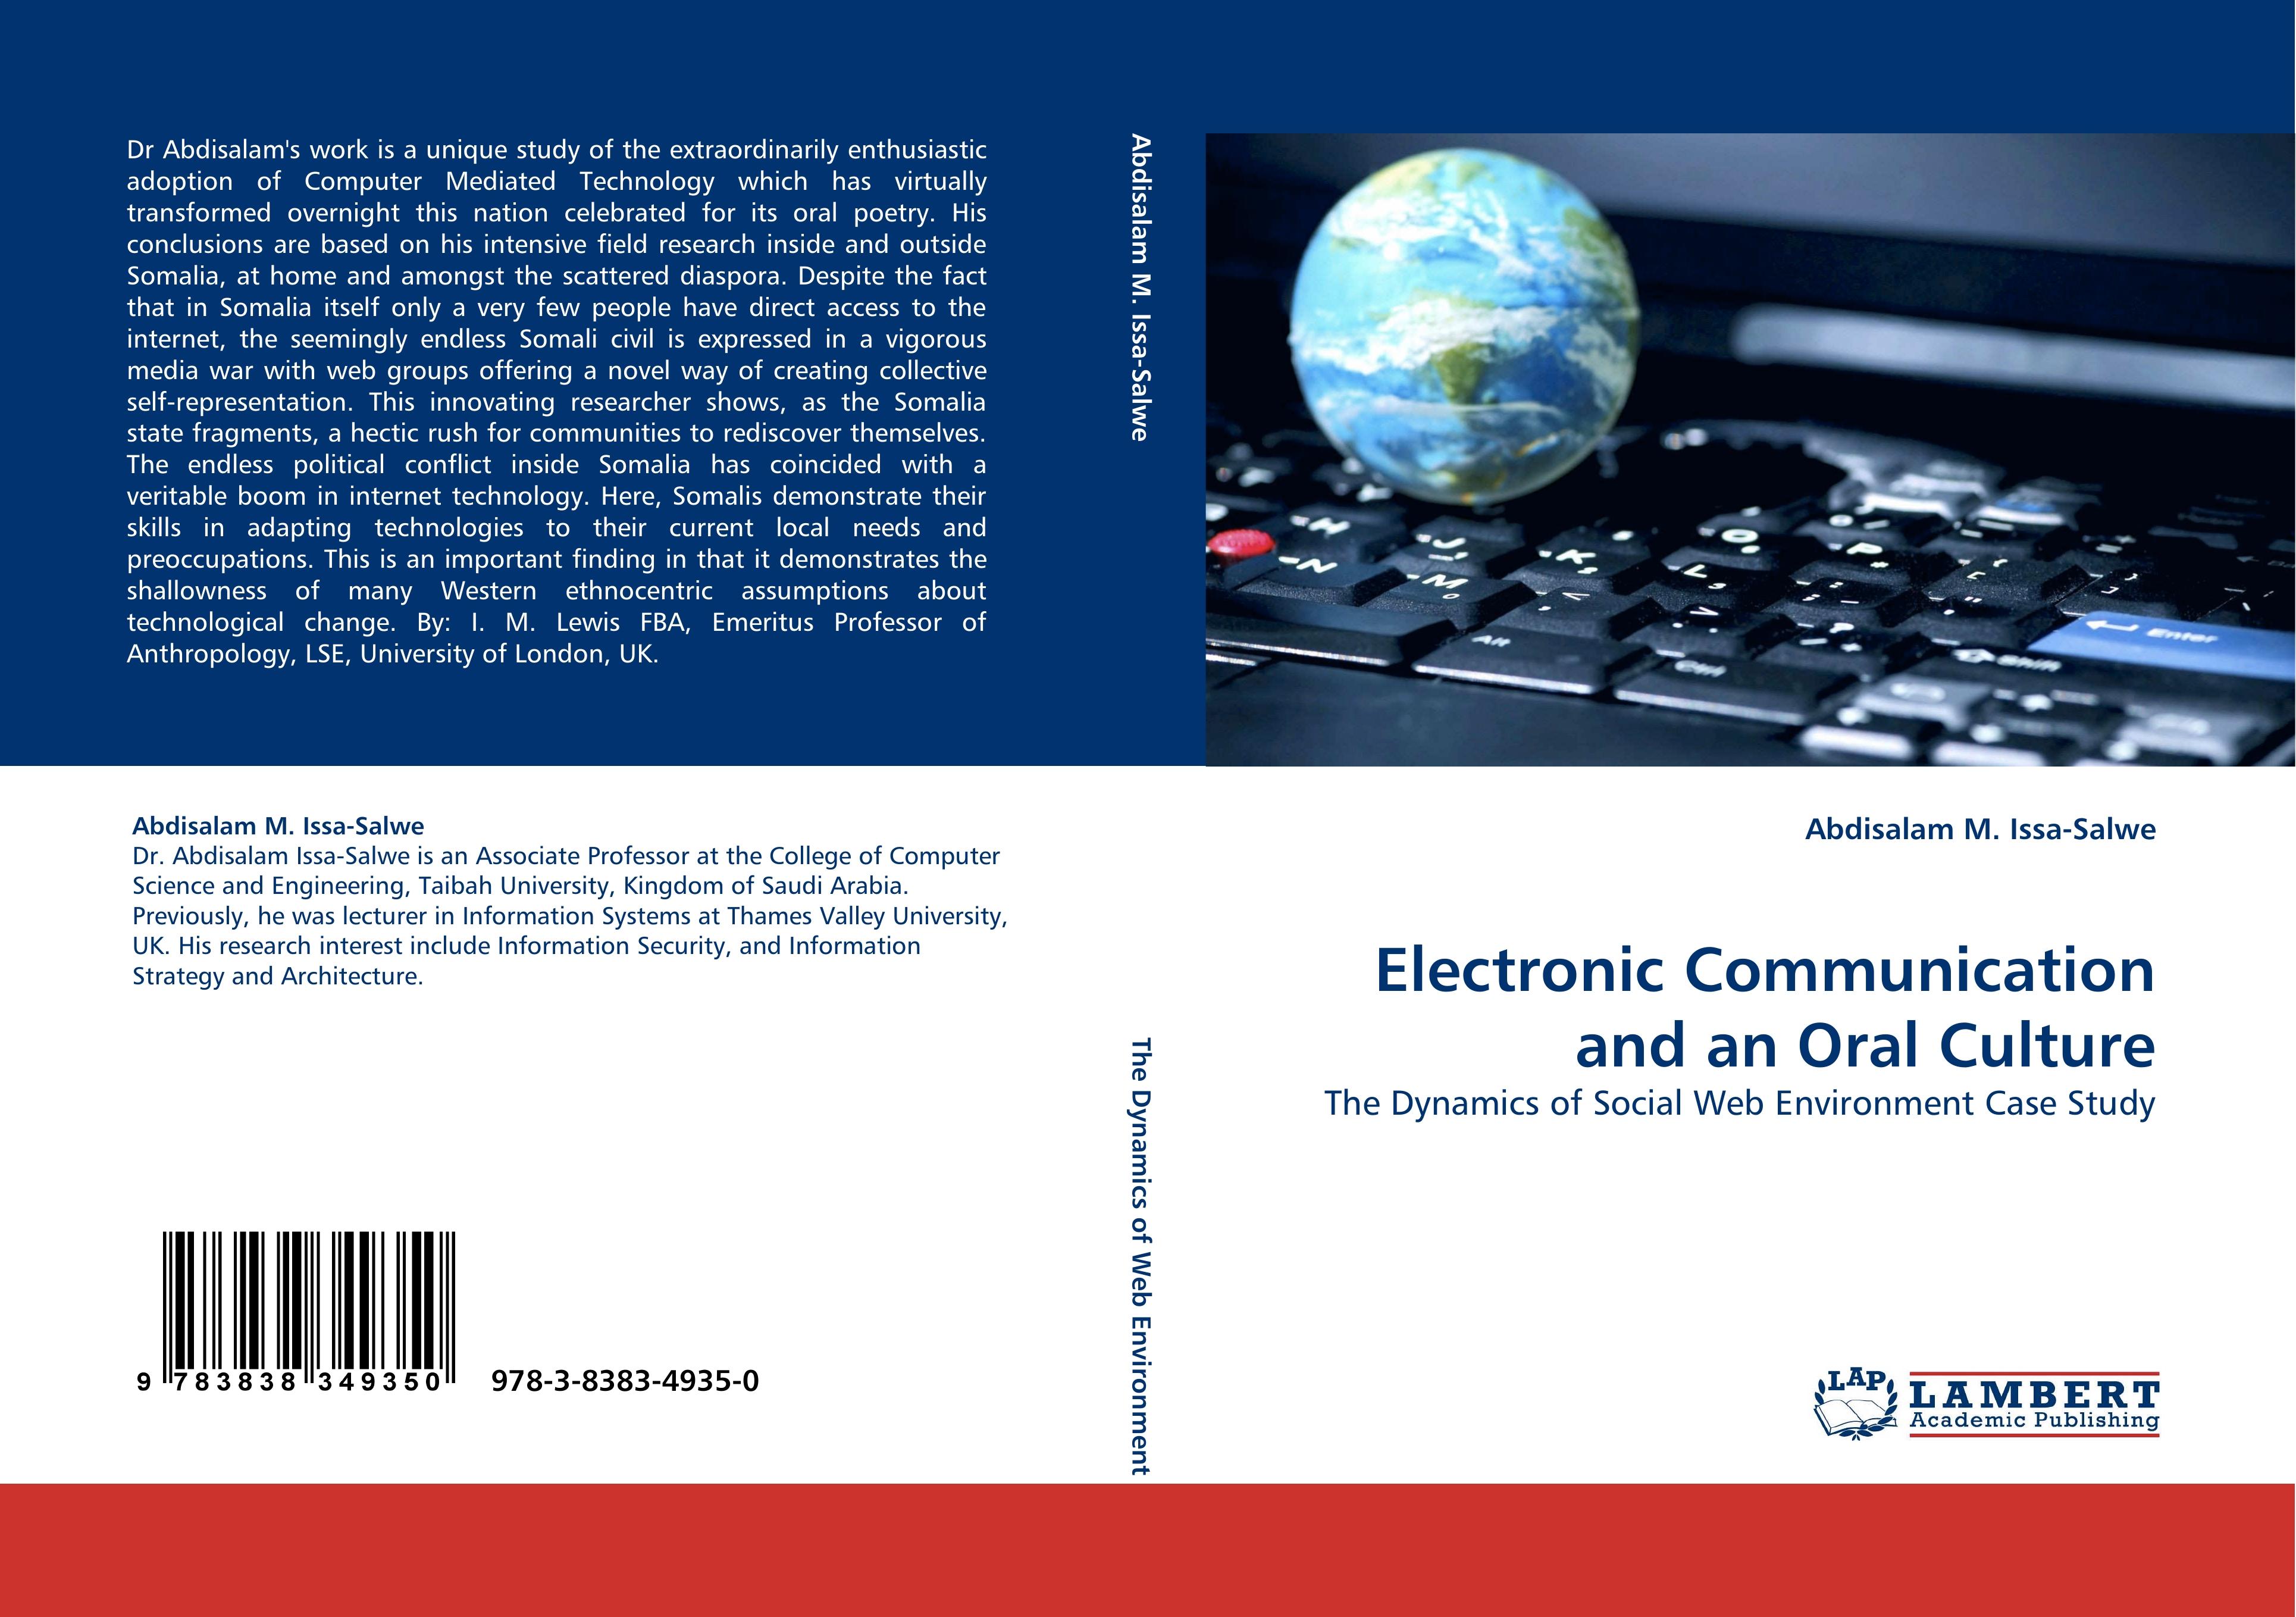 Electronic Communication and an Oral Culture / The Dynamics of Social Web Environment Case Study / Abdisalam M. Issa-Salwe / Taschenbuch / Paperback / 276 S. / Englisch / 2010 / EAN 9783838349350 - Issa-Salwe, Abdisalam M.